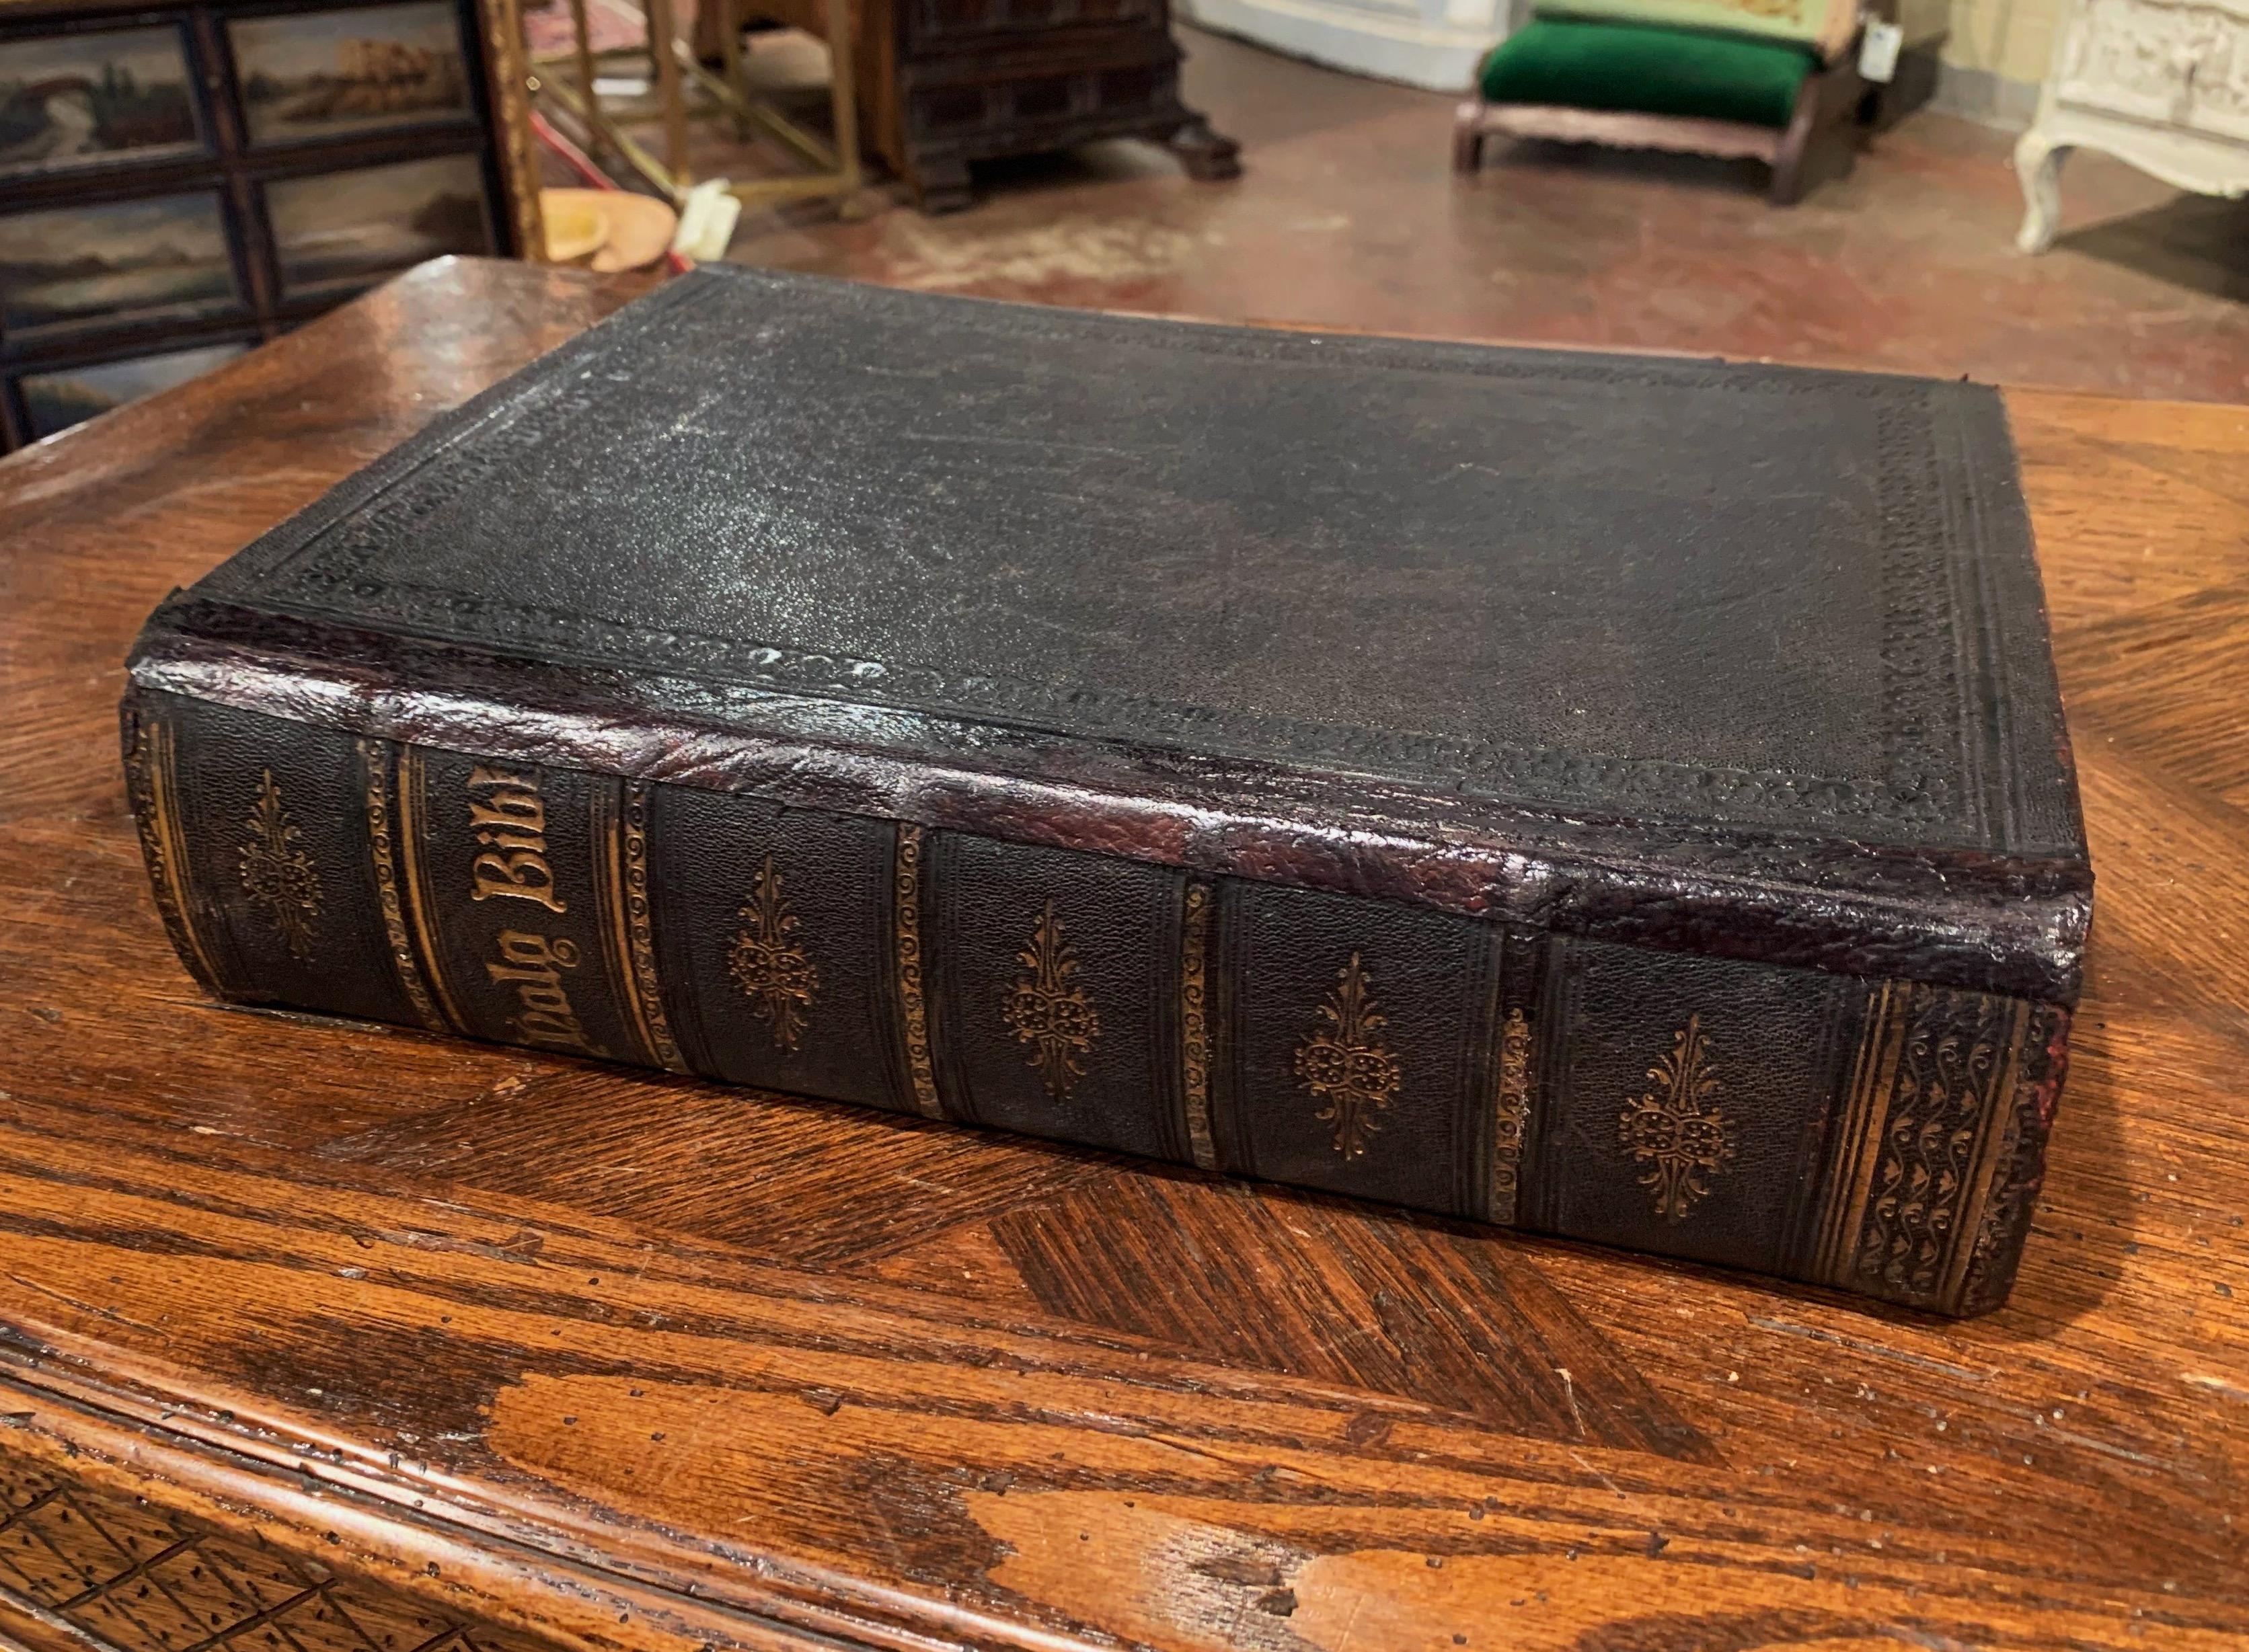 This beautiful antique practical and devotional Bible, was printed in Glasgow, Scotland by Williams Collins and Co., circa 1860. The religious book flaunts a black leather cover, embellished with tooling and top page edge gilt. Inside, the Bible